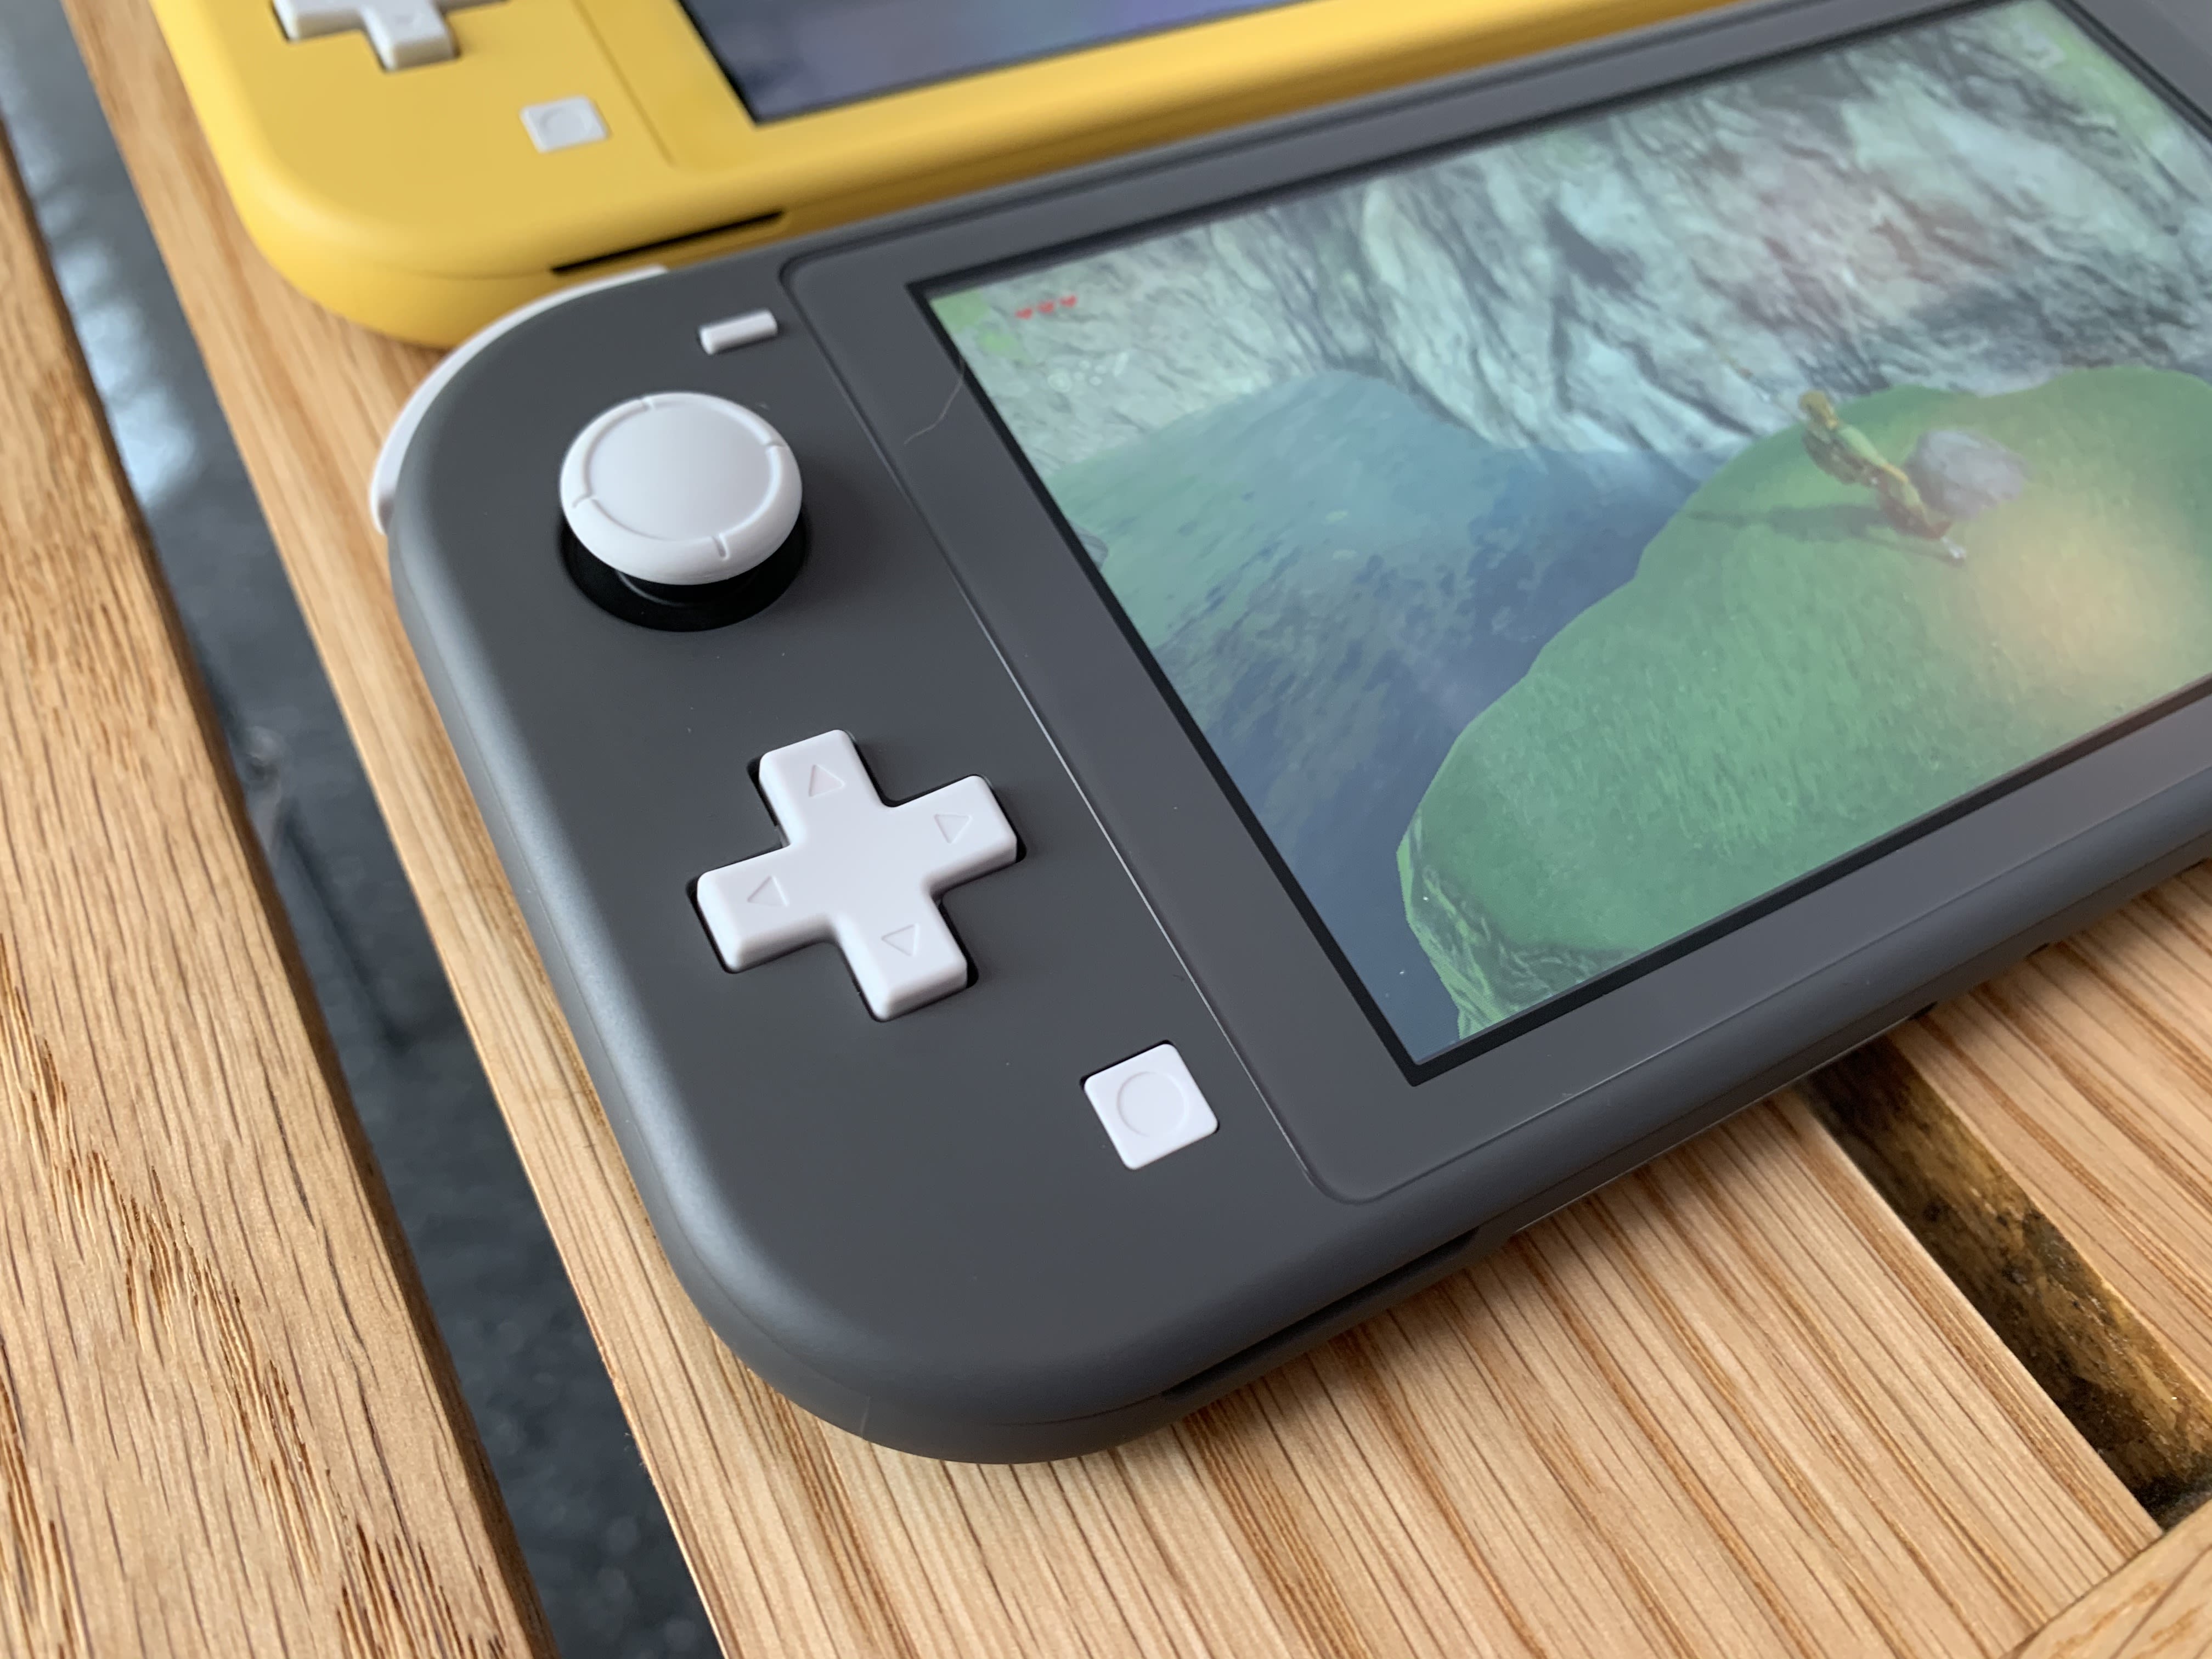 Nintendo Switch Lite Review: An Unapologetic Handheld